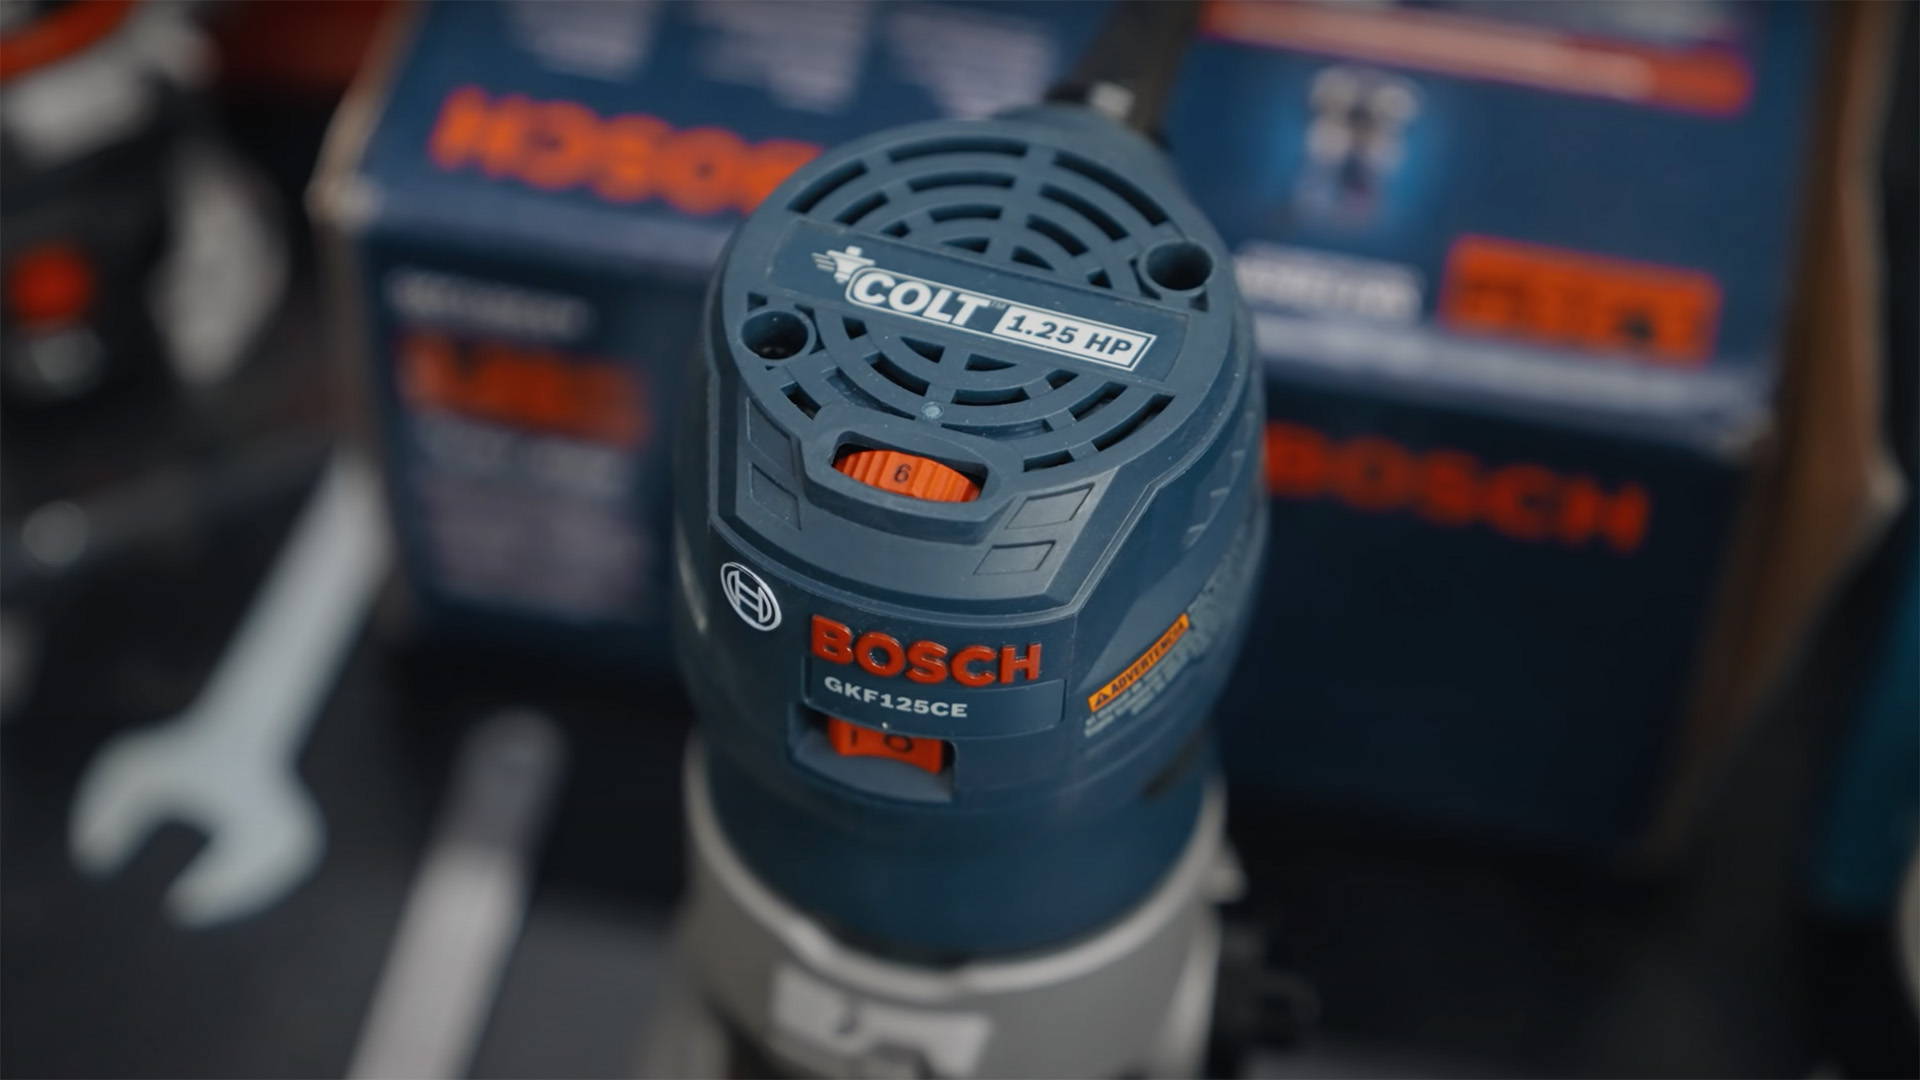 Bosch compact router